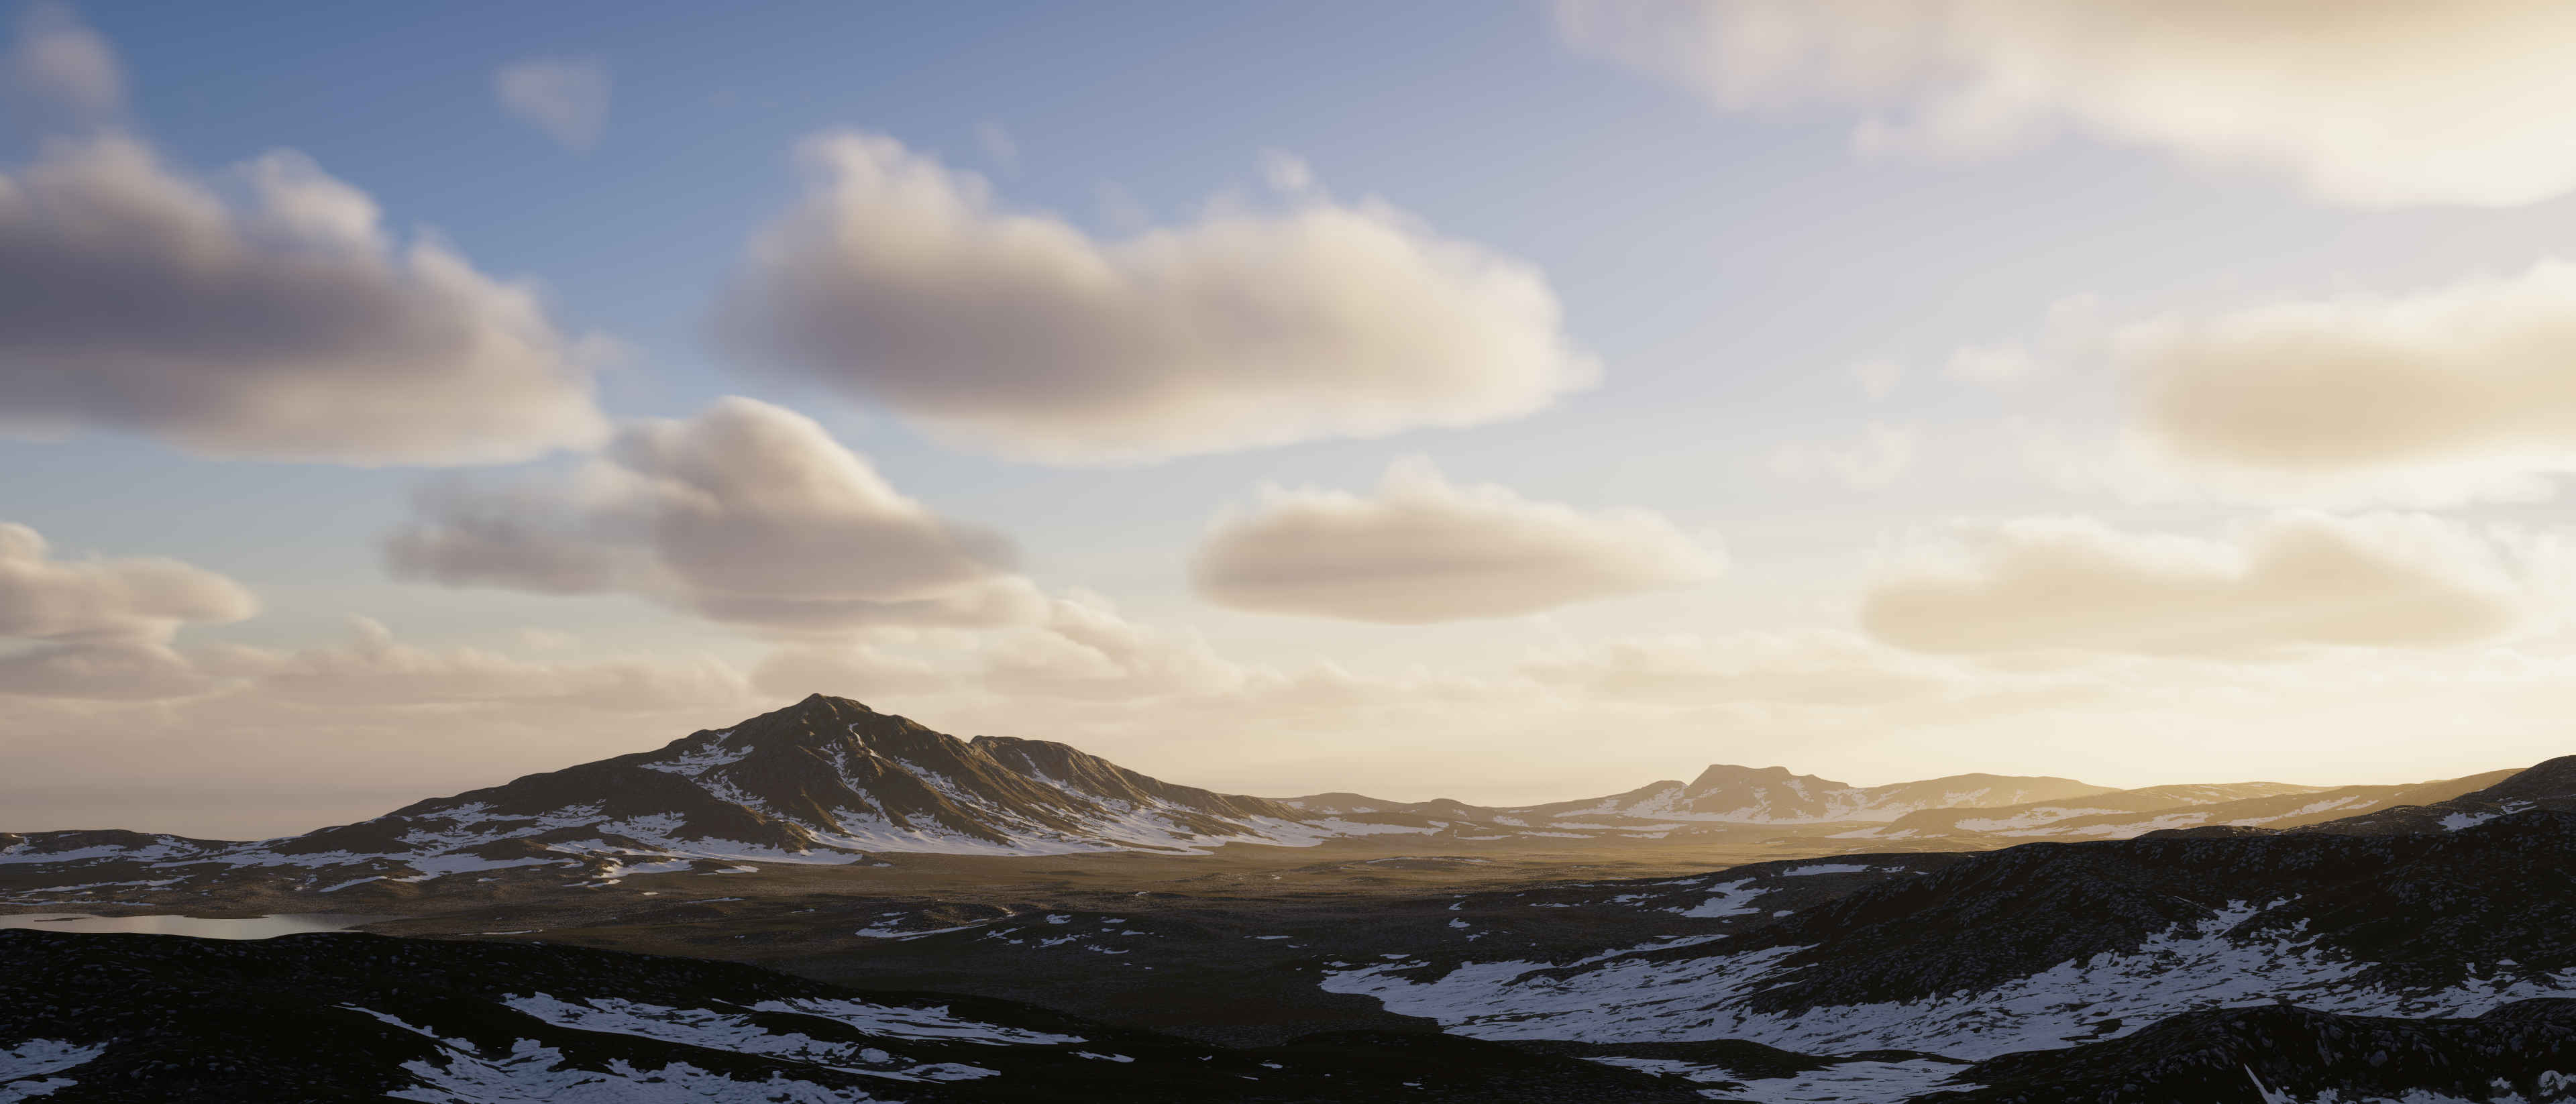 Image of scattering clouds over a flat snowy terrain with hills